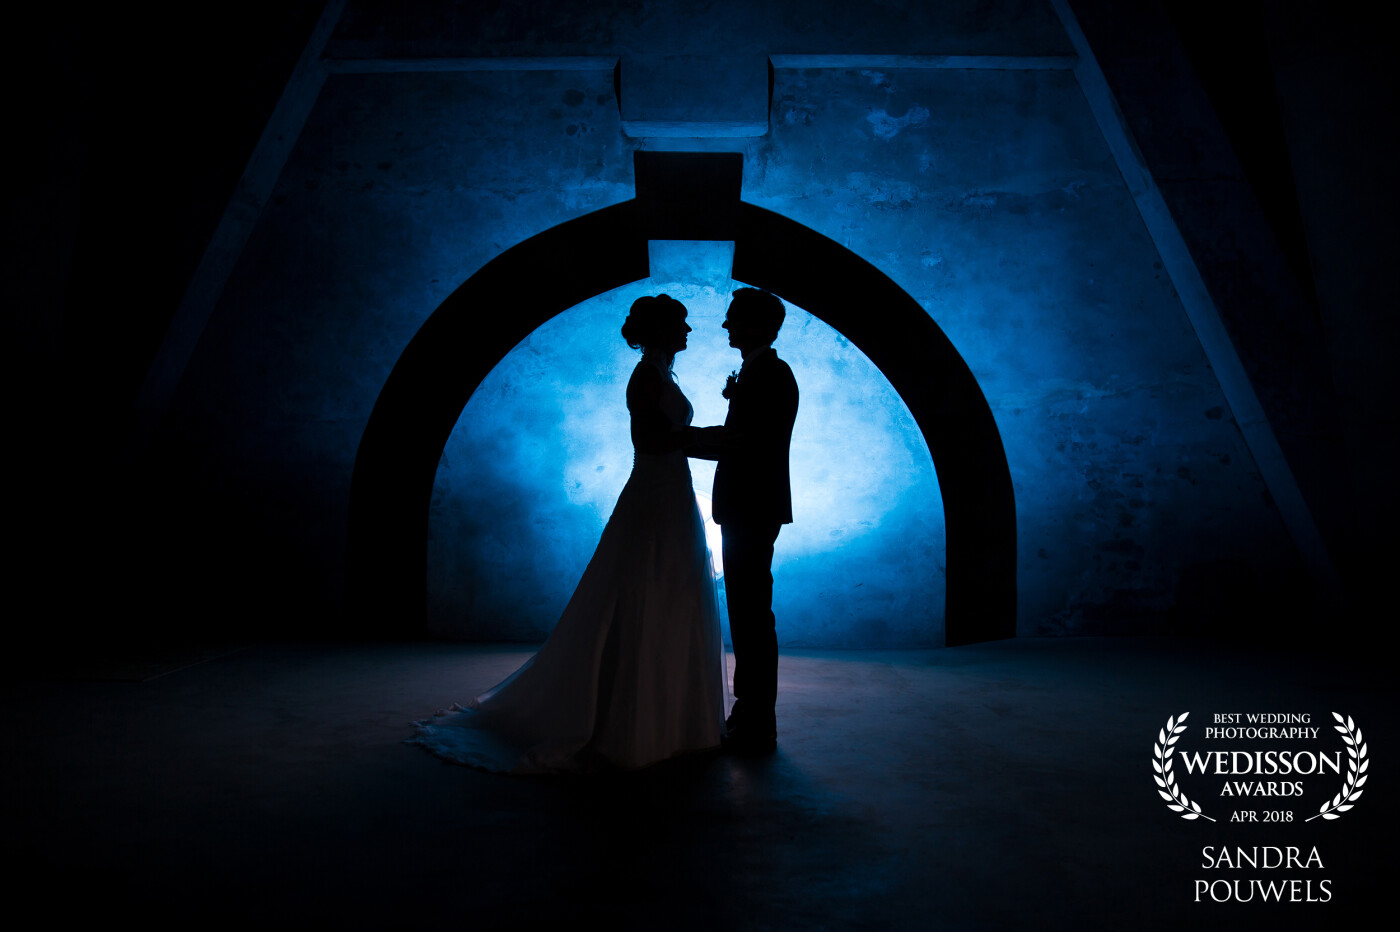 On a rainy day this picture was taken in an old water tower. By pointing a blue flash on the wall we created a beautiful silhouette of the bride and groom. 